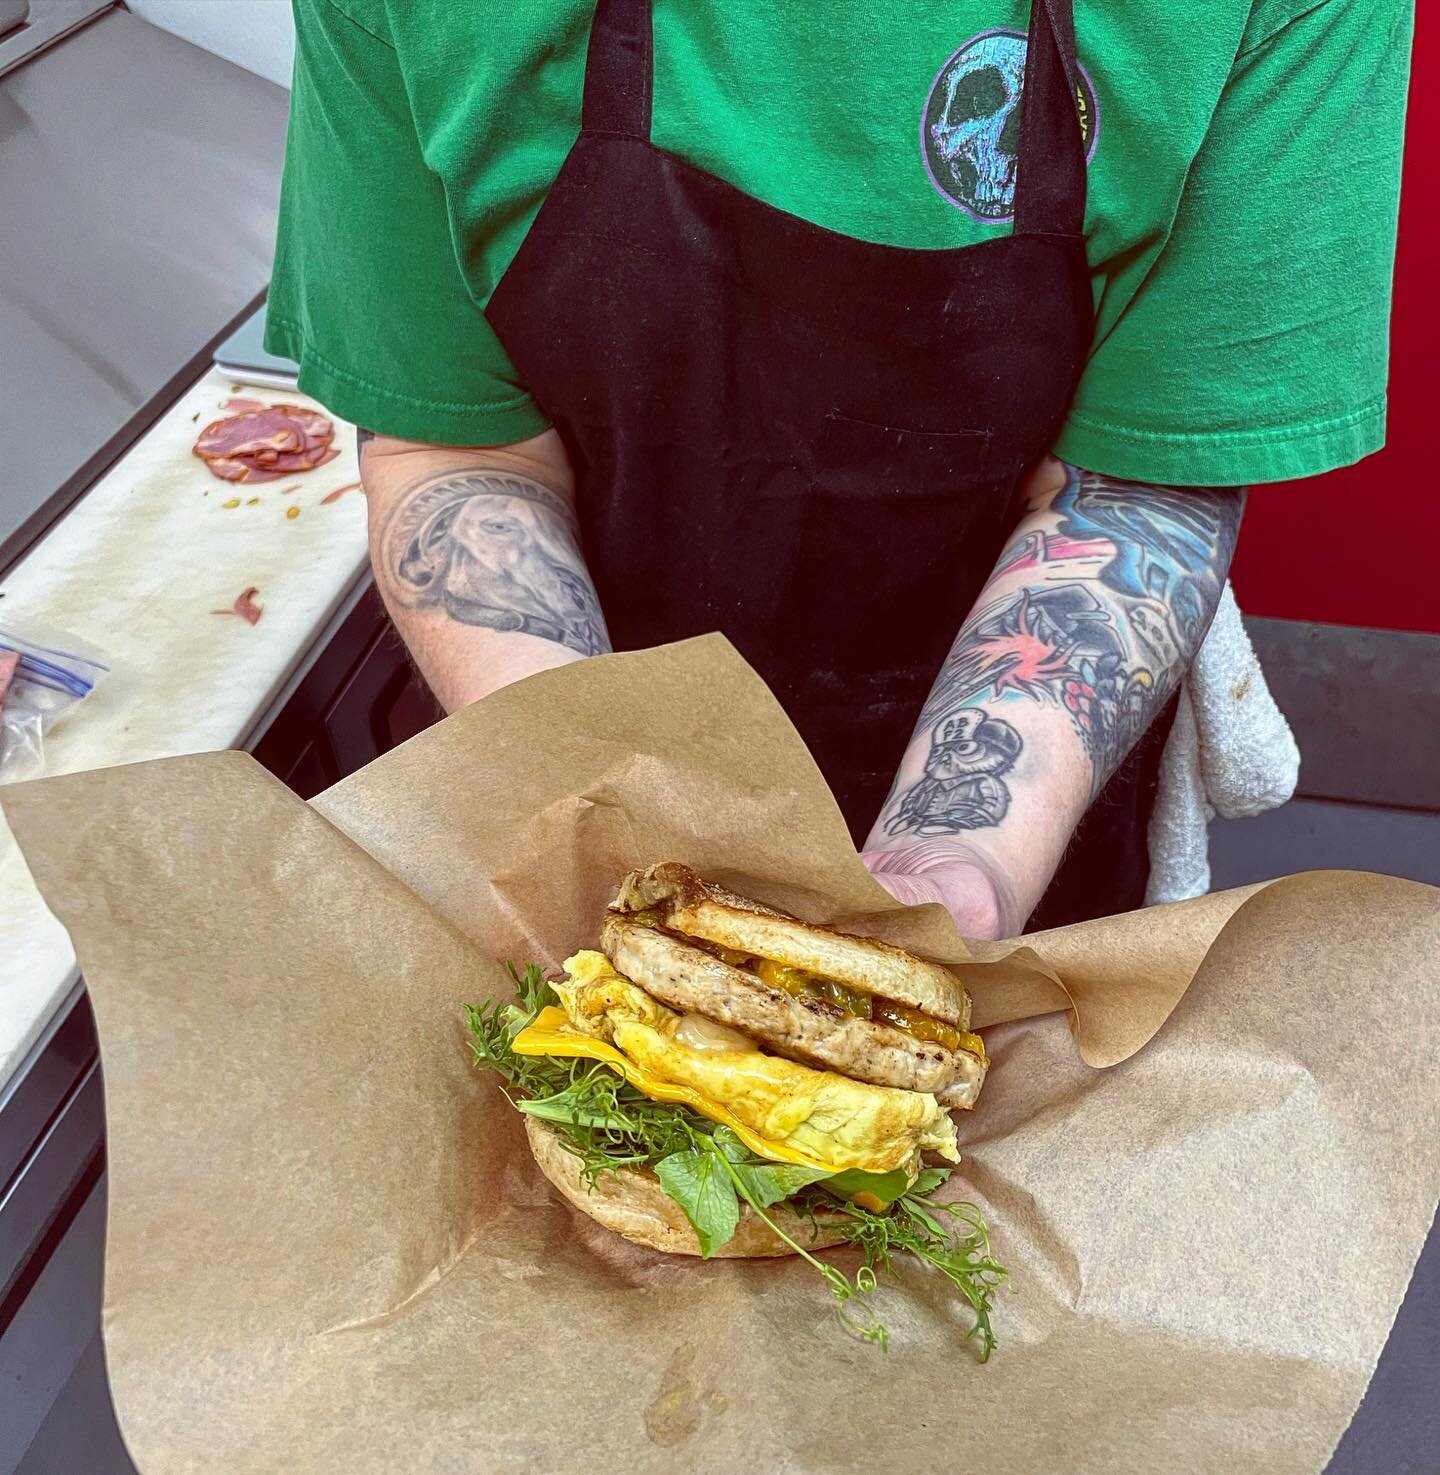 Git yer McRadio your way and other brunch treats tomorrow at Bottleshock from 12pm-5pm! 

McRadio: 
-House sourdough maple English muffin
-housemade Autonomy Farms chicken sausage
-a fried Ayden&rsquo;s egg
-Fortitude Farms sweet pea shoots
-maple bu